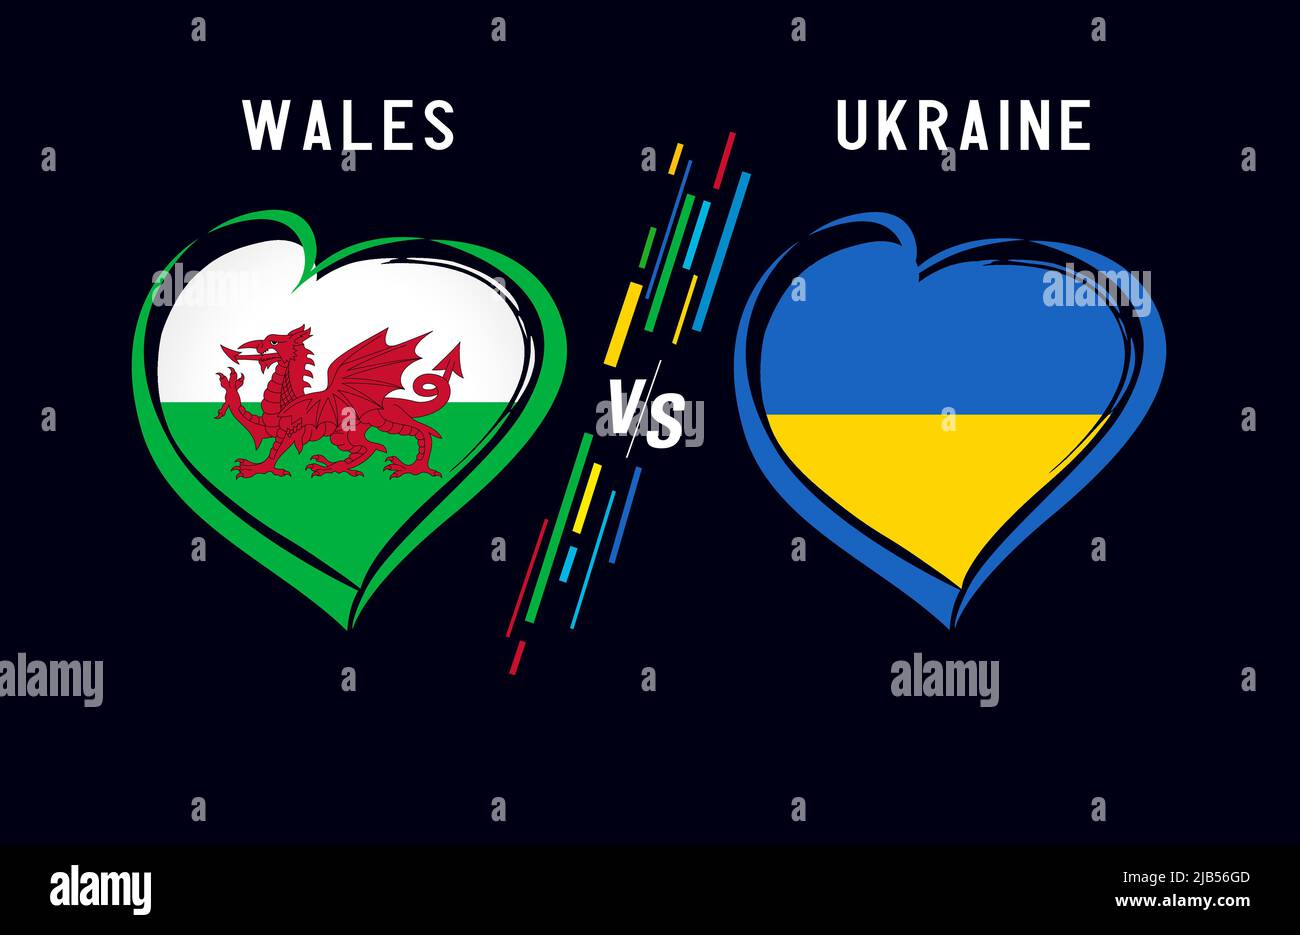 Flag hearts emblem on black background Wales vs Ukraine. National team soccer Welsh and Ukrainian, flag icons. Europe football playoff qualifiers 2022 Stock Vector